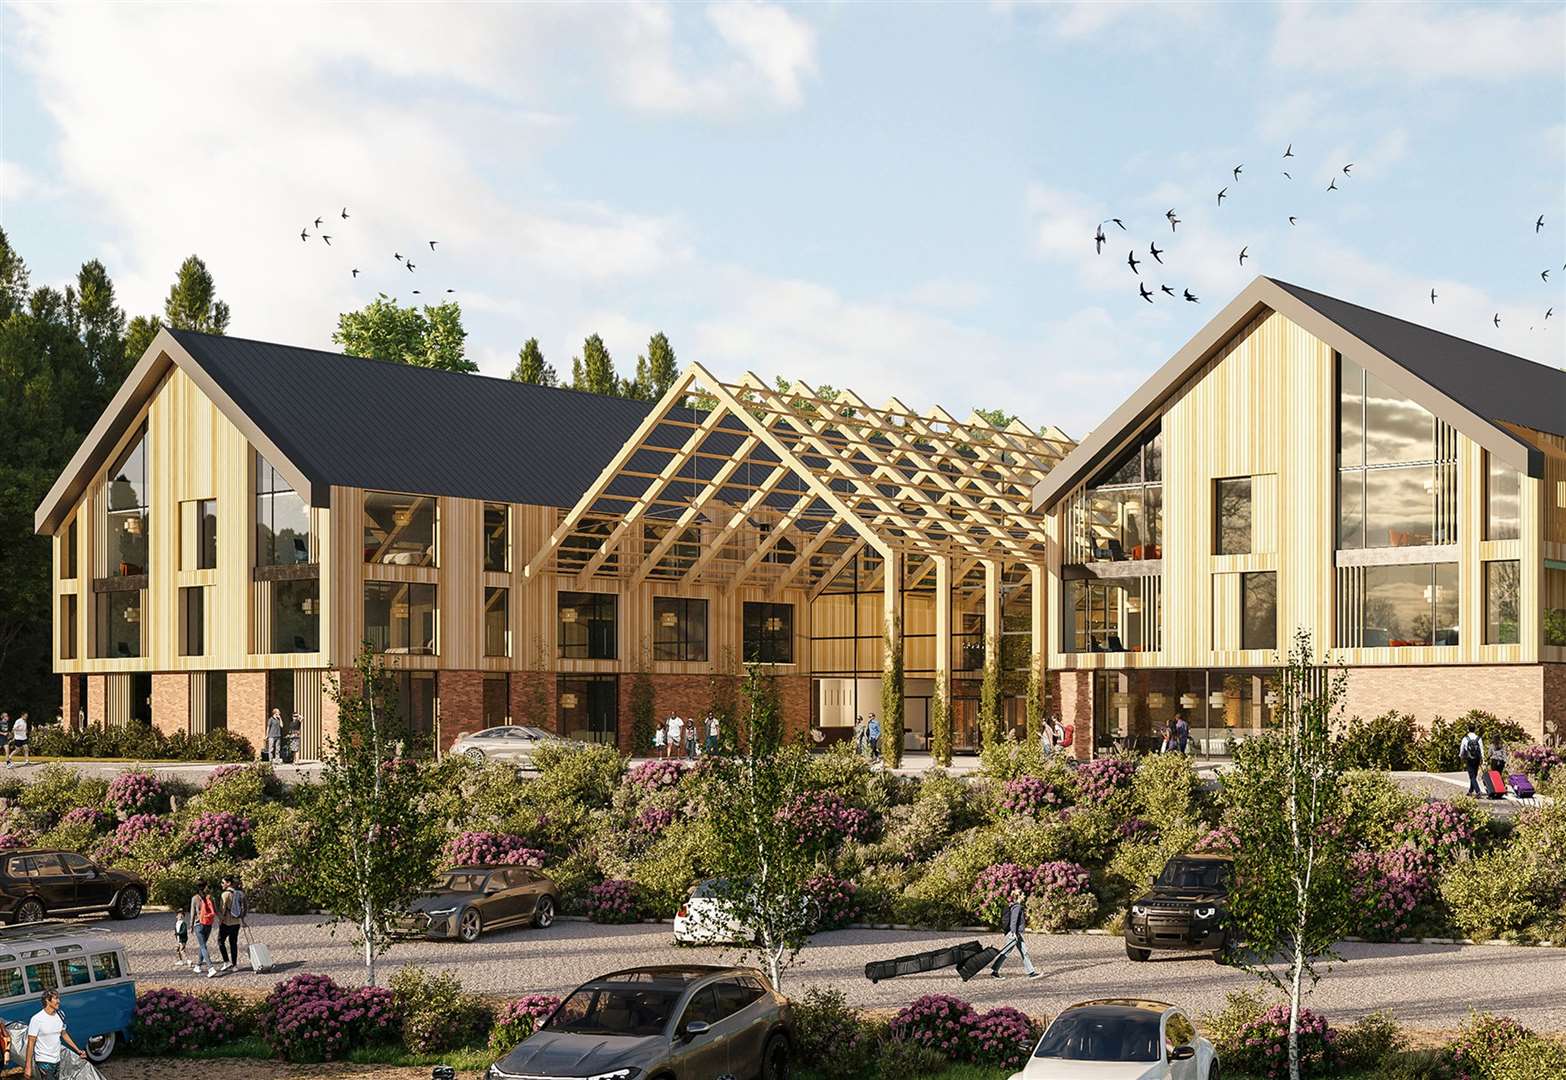 An artist’s impression of plans for the proposed hotel for Betteshanger. Picture: Betteshanger Country Park